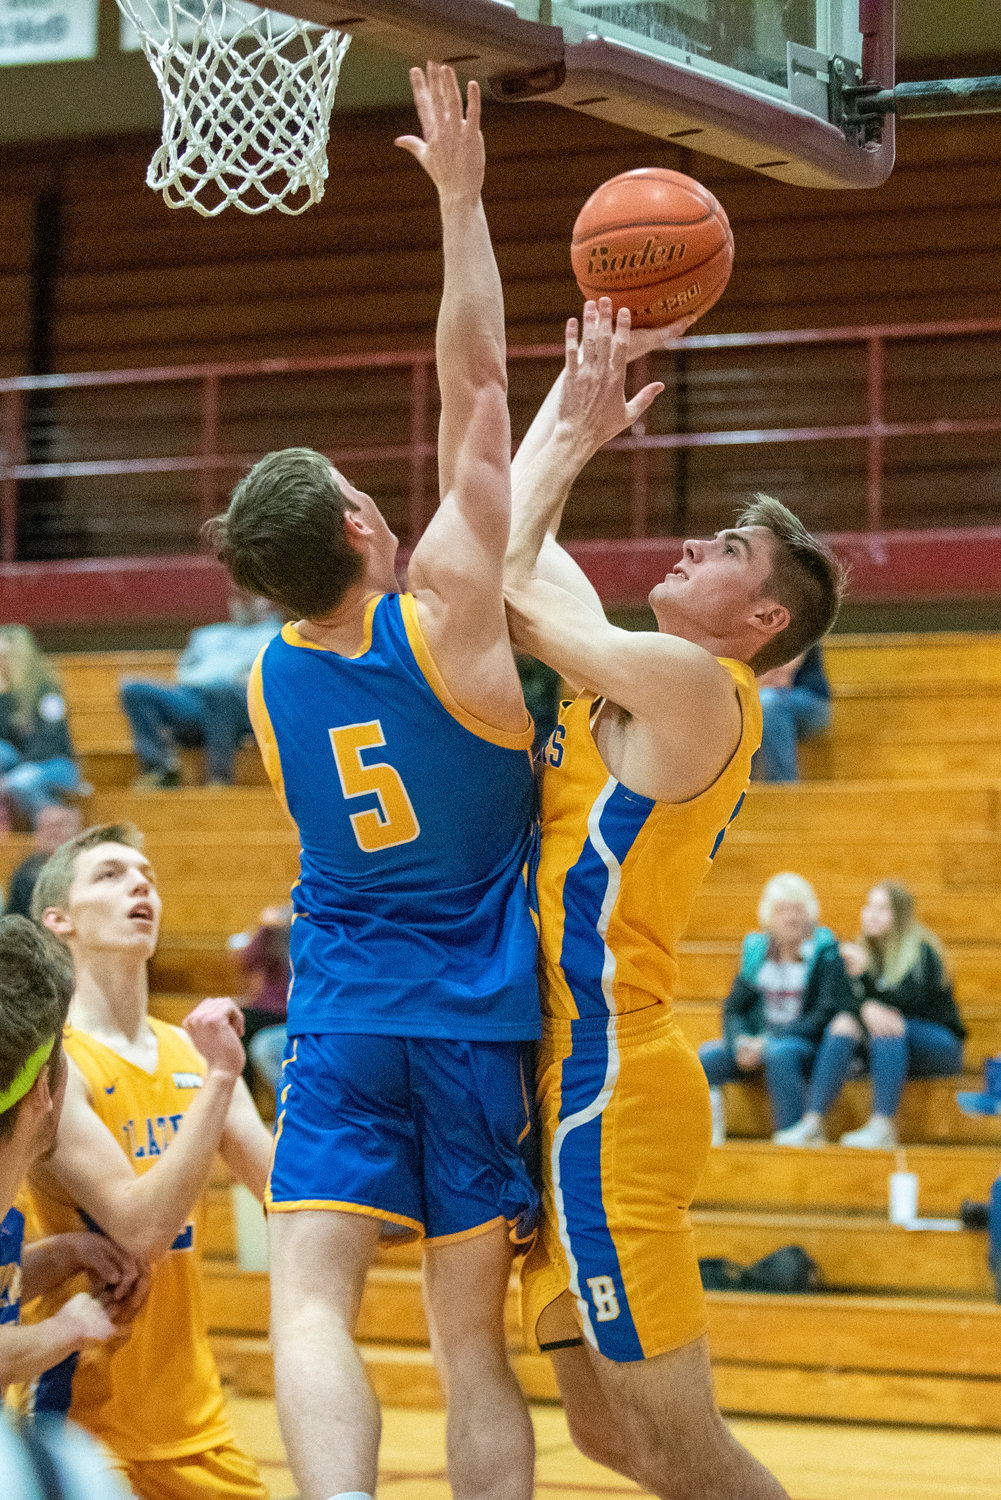 Centralia's Landon Kaut takes it to the hoops against Adna's Chase Collins (5) during the SWW Senior All-Star Game on March 26.